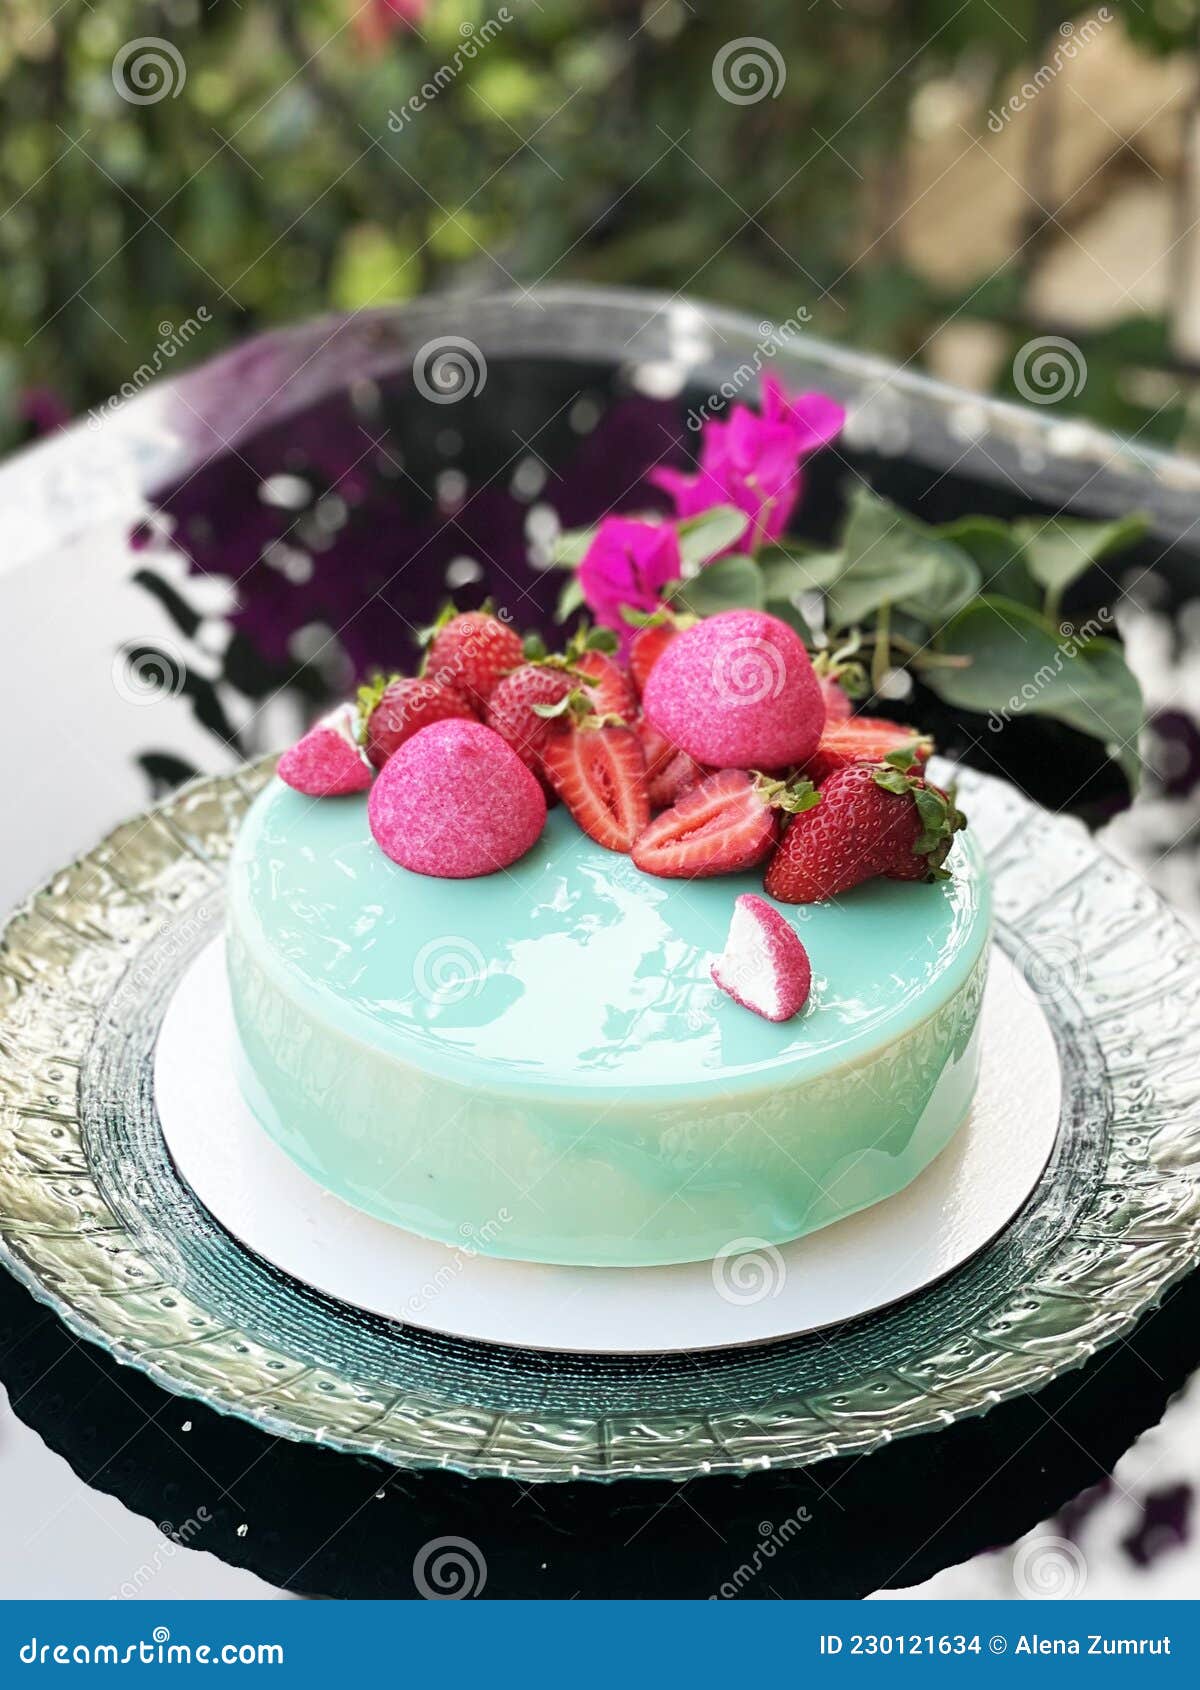 A Beautiful Delicious Mousse Cake On A Mirrored Table Juicy